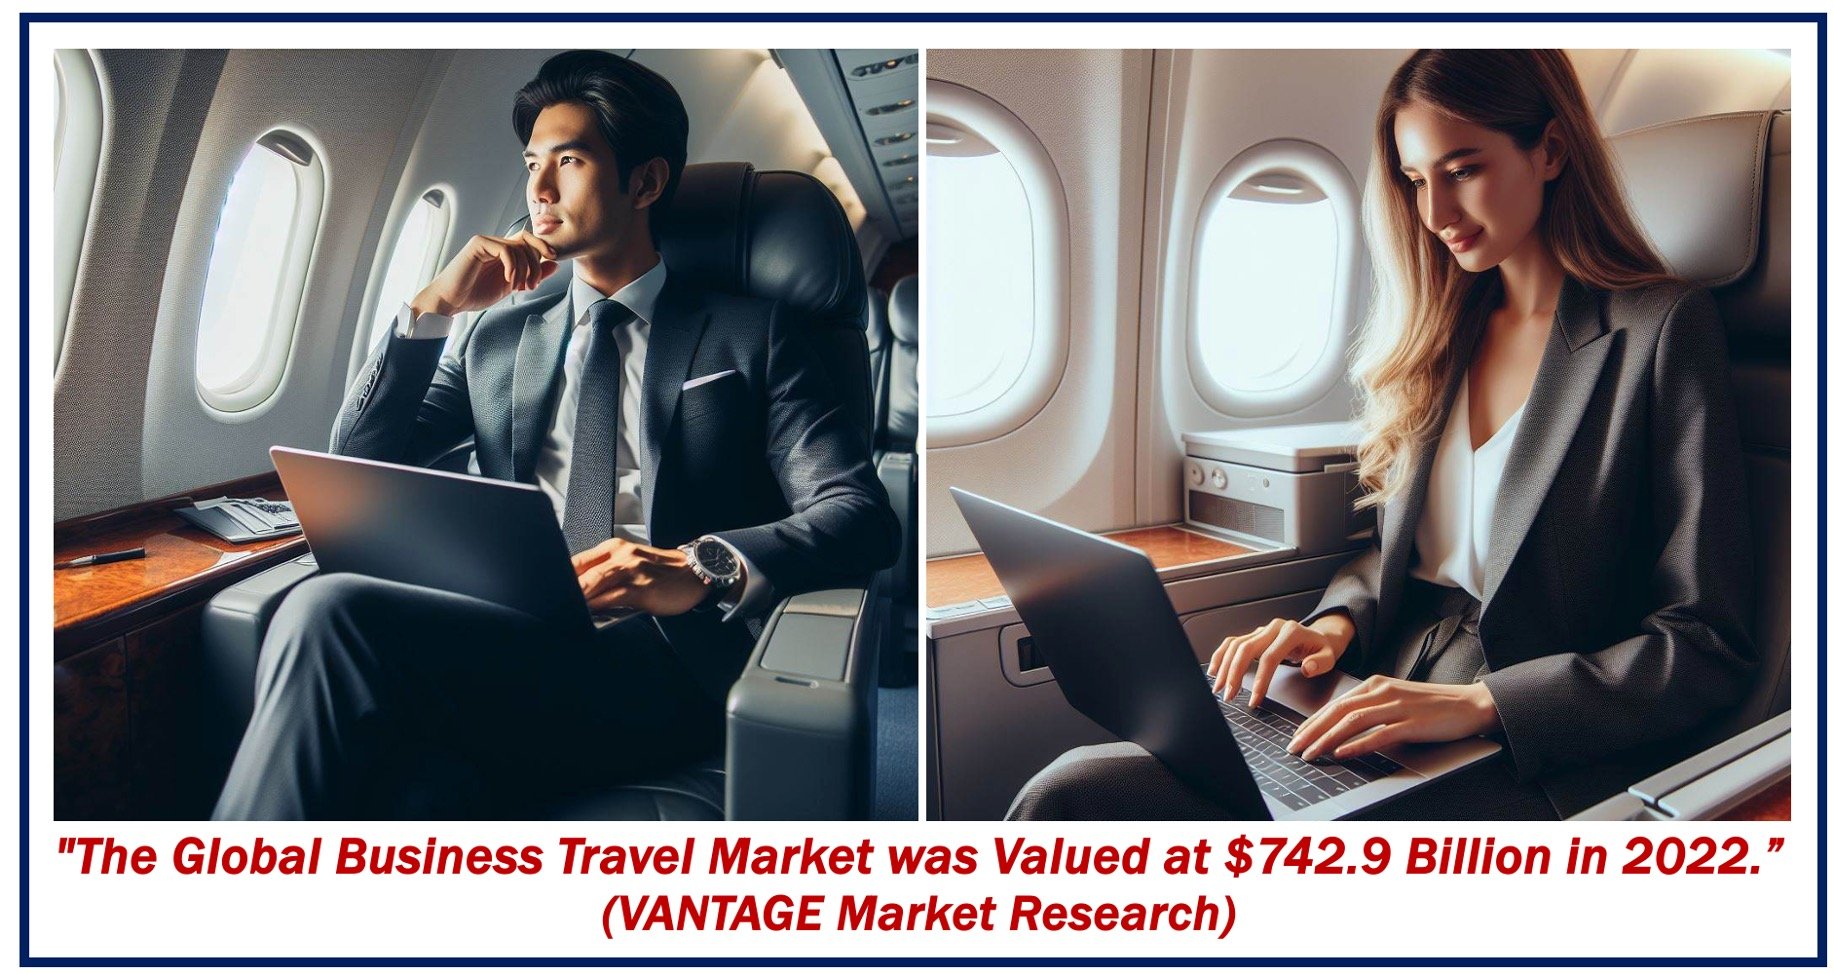 Business Travel 101: What is Business Travel? And Why Use a Travel